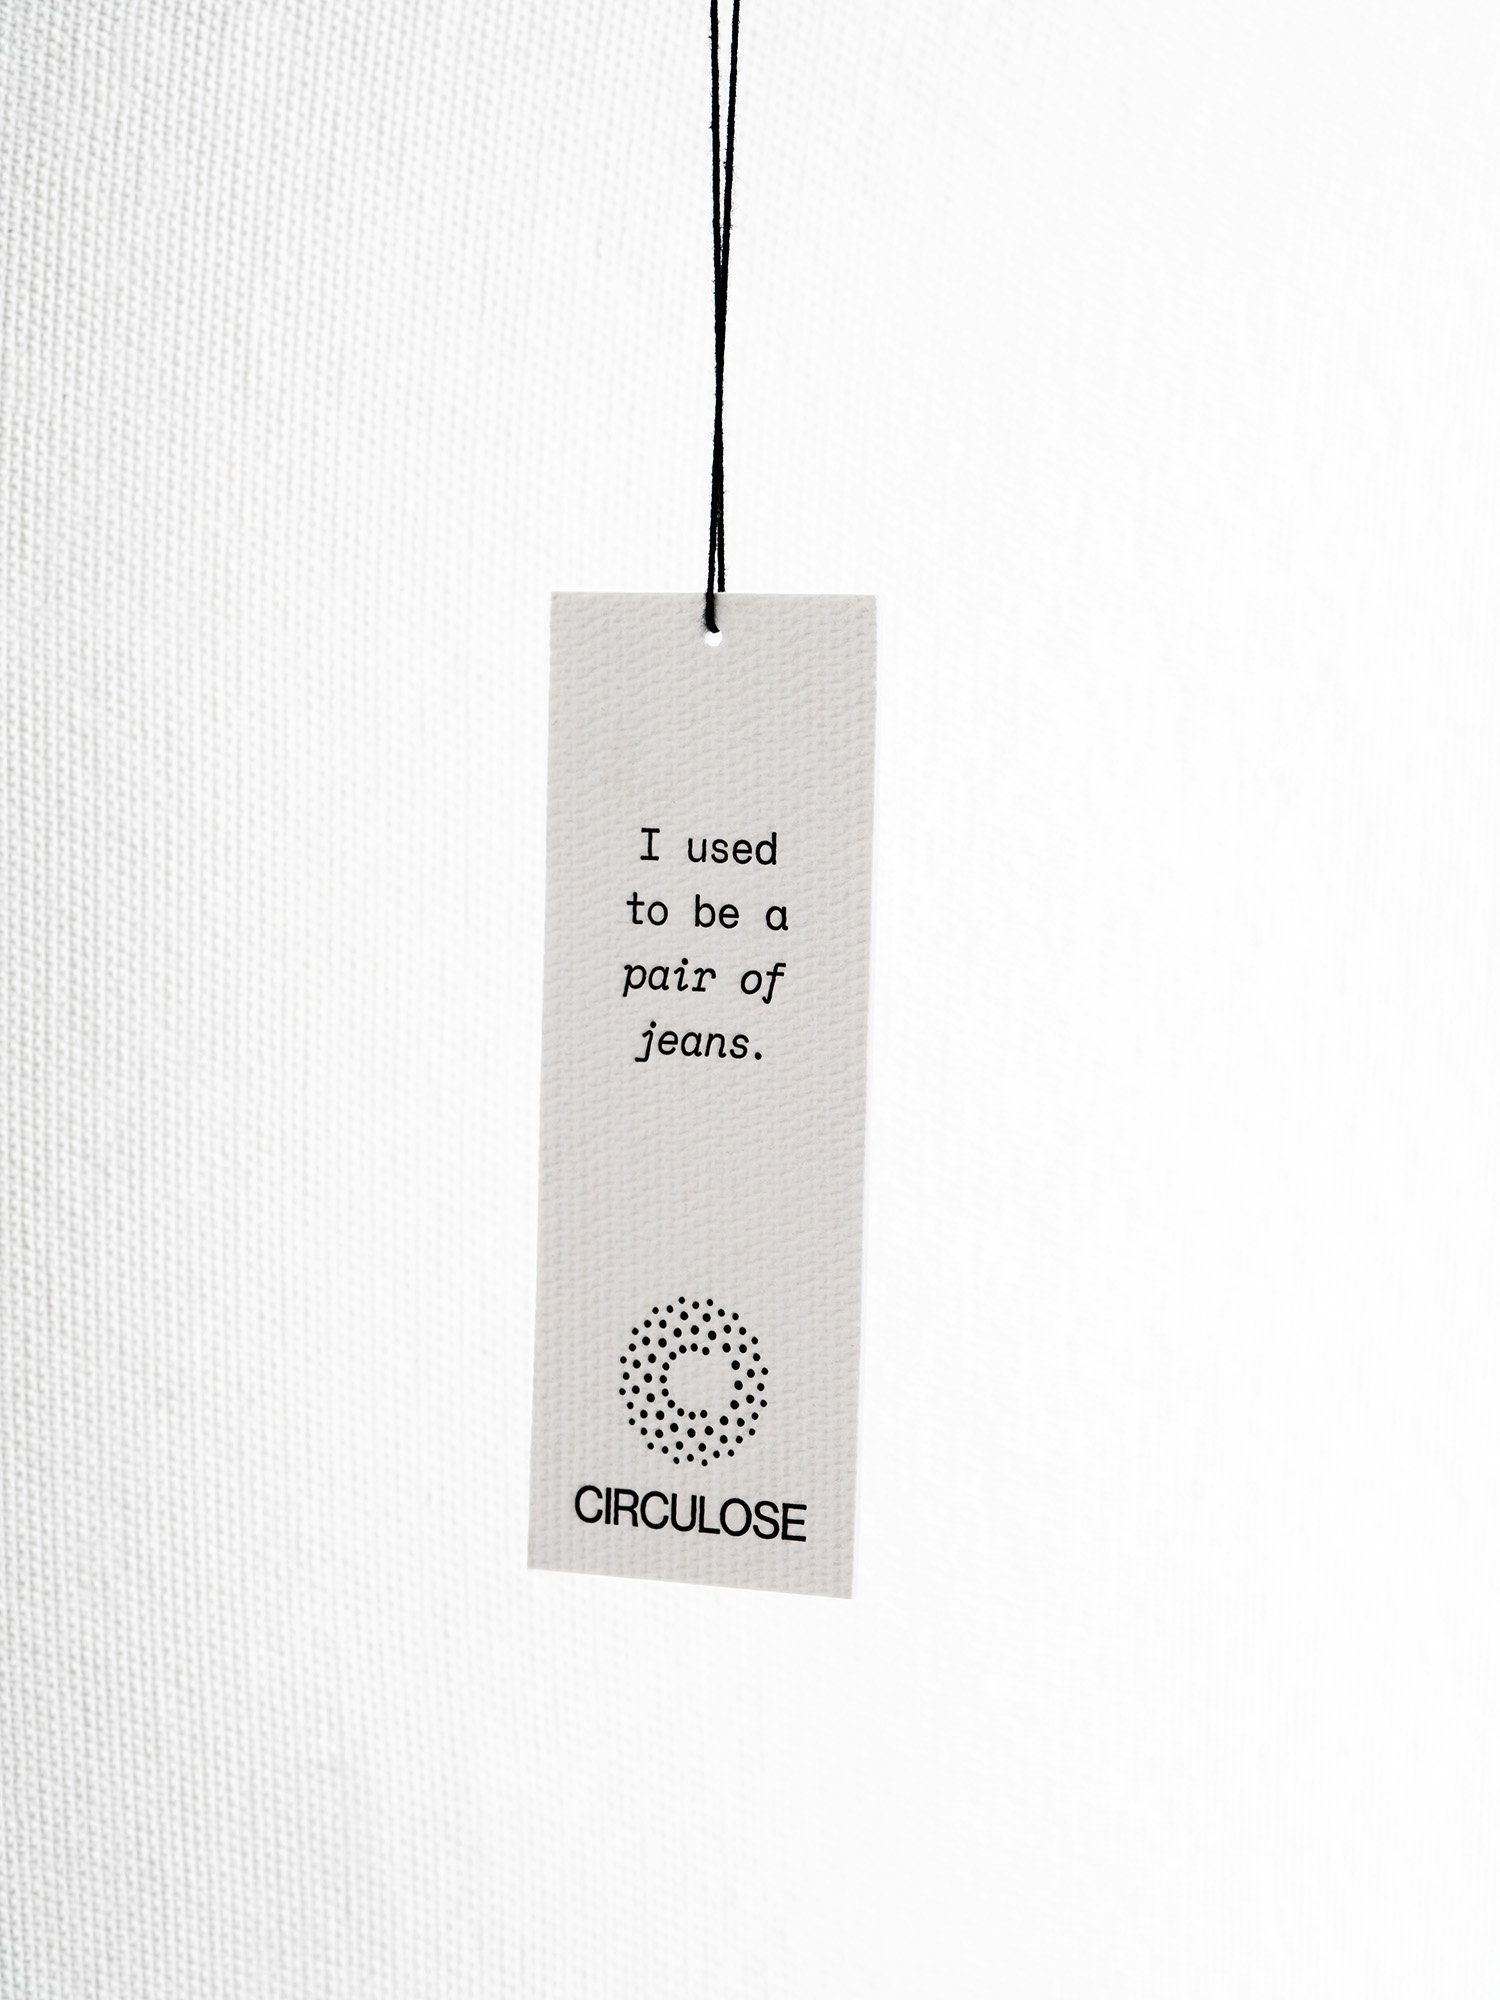 A clothing tag from Circulose